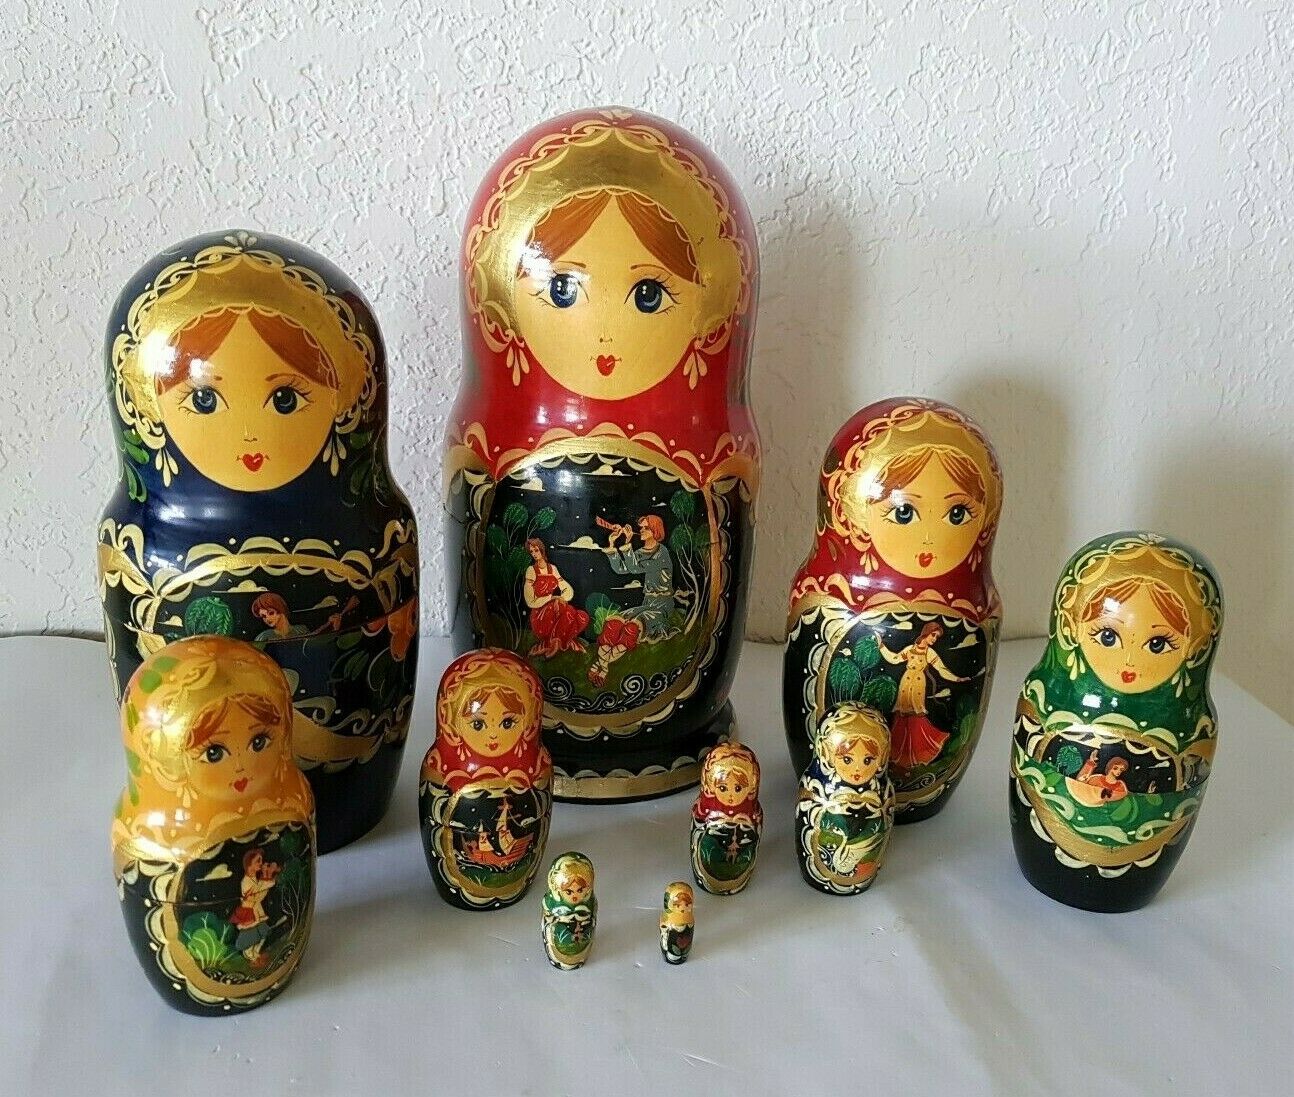 Vintage Russian Wood Nesting Dolls Matryoshka 10 Pieces 9"h Signed Fairy Tale